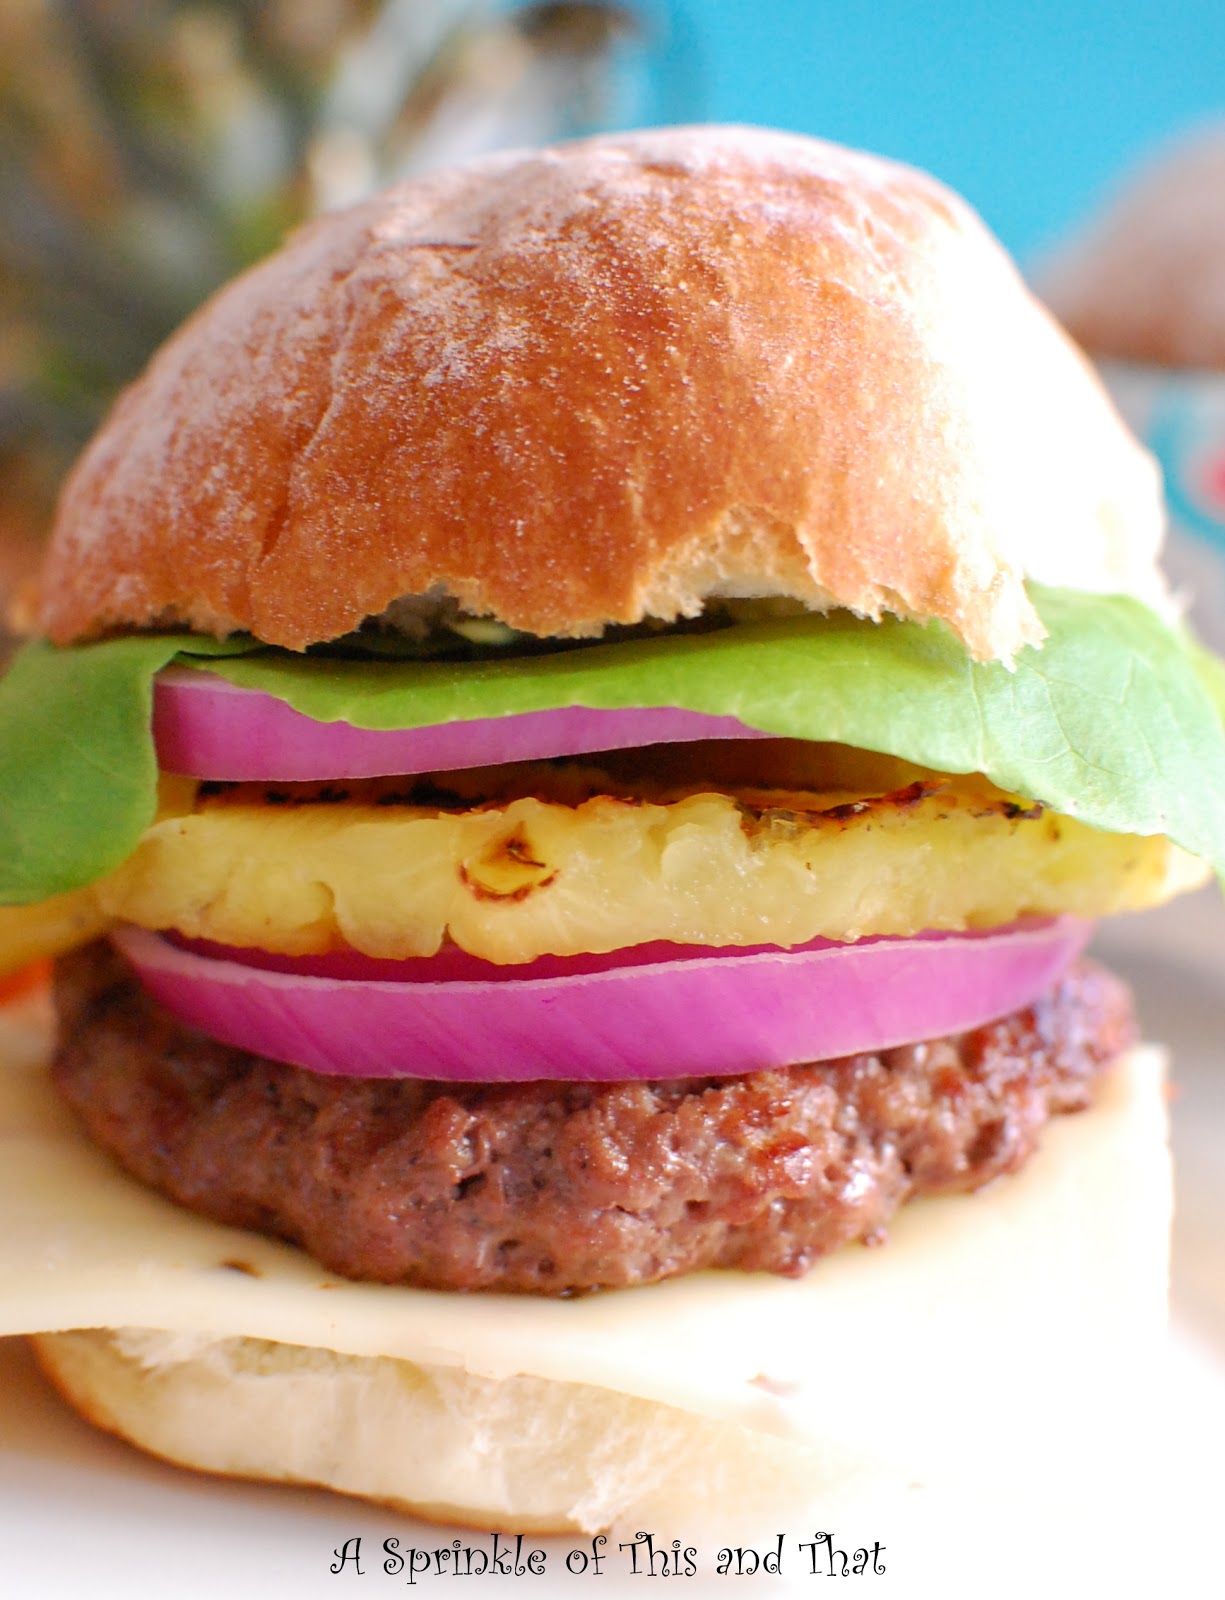 A Sprinkle of This and That: Pineapple Teriyaki Burger